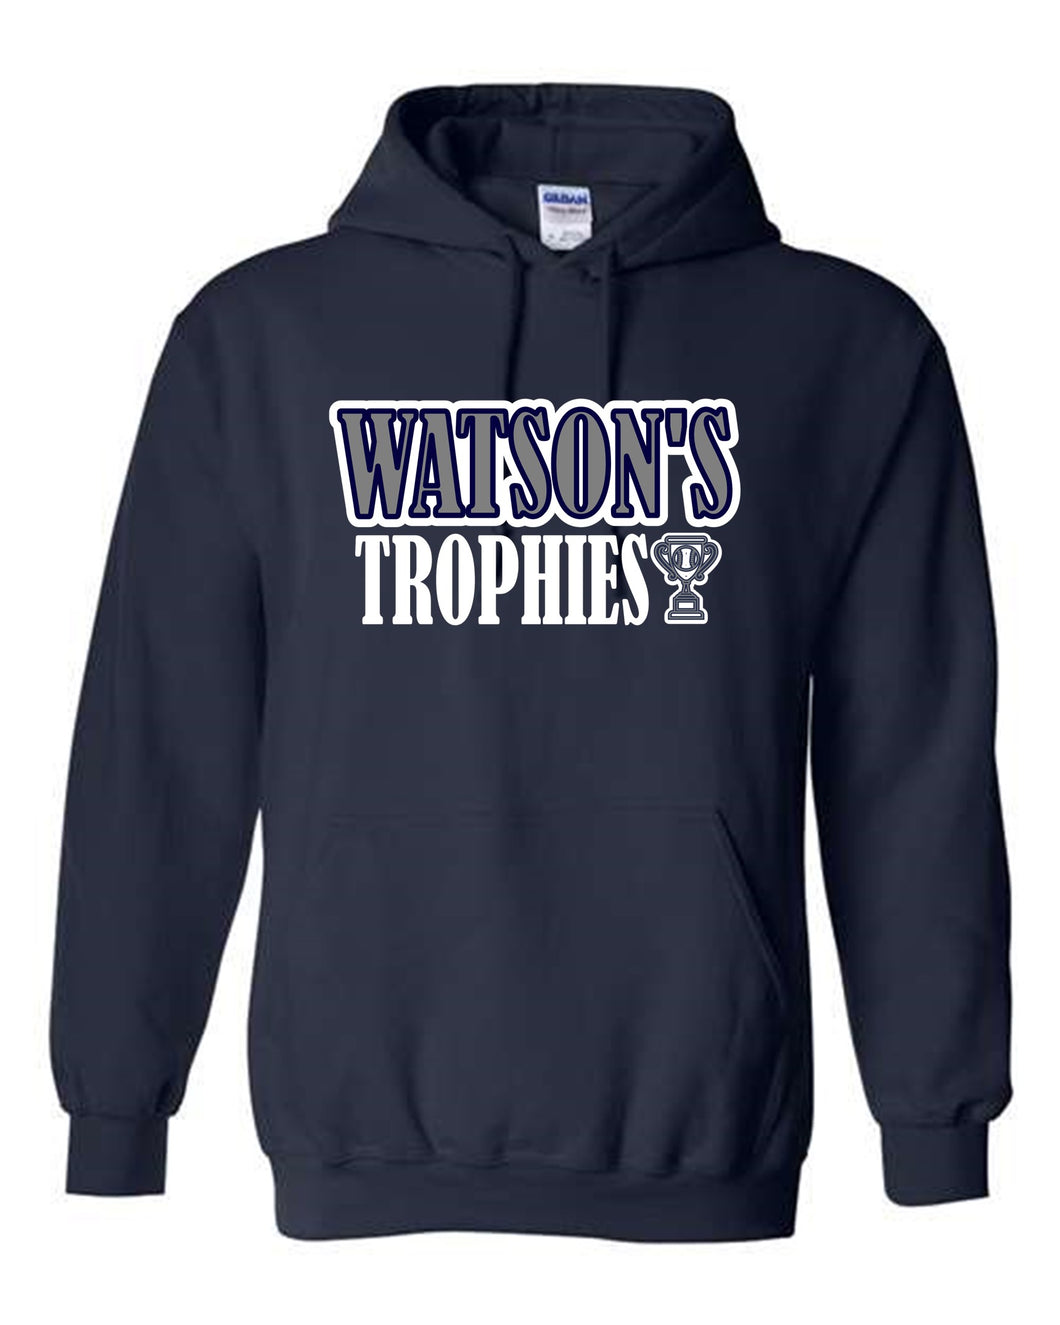 Watson's Trophies Hoodie - Youth and Adult